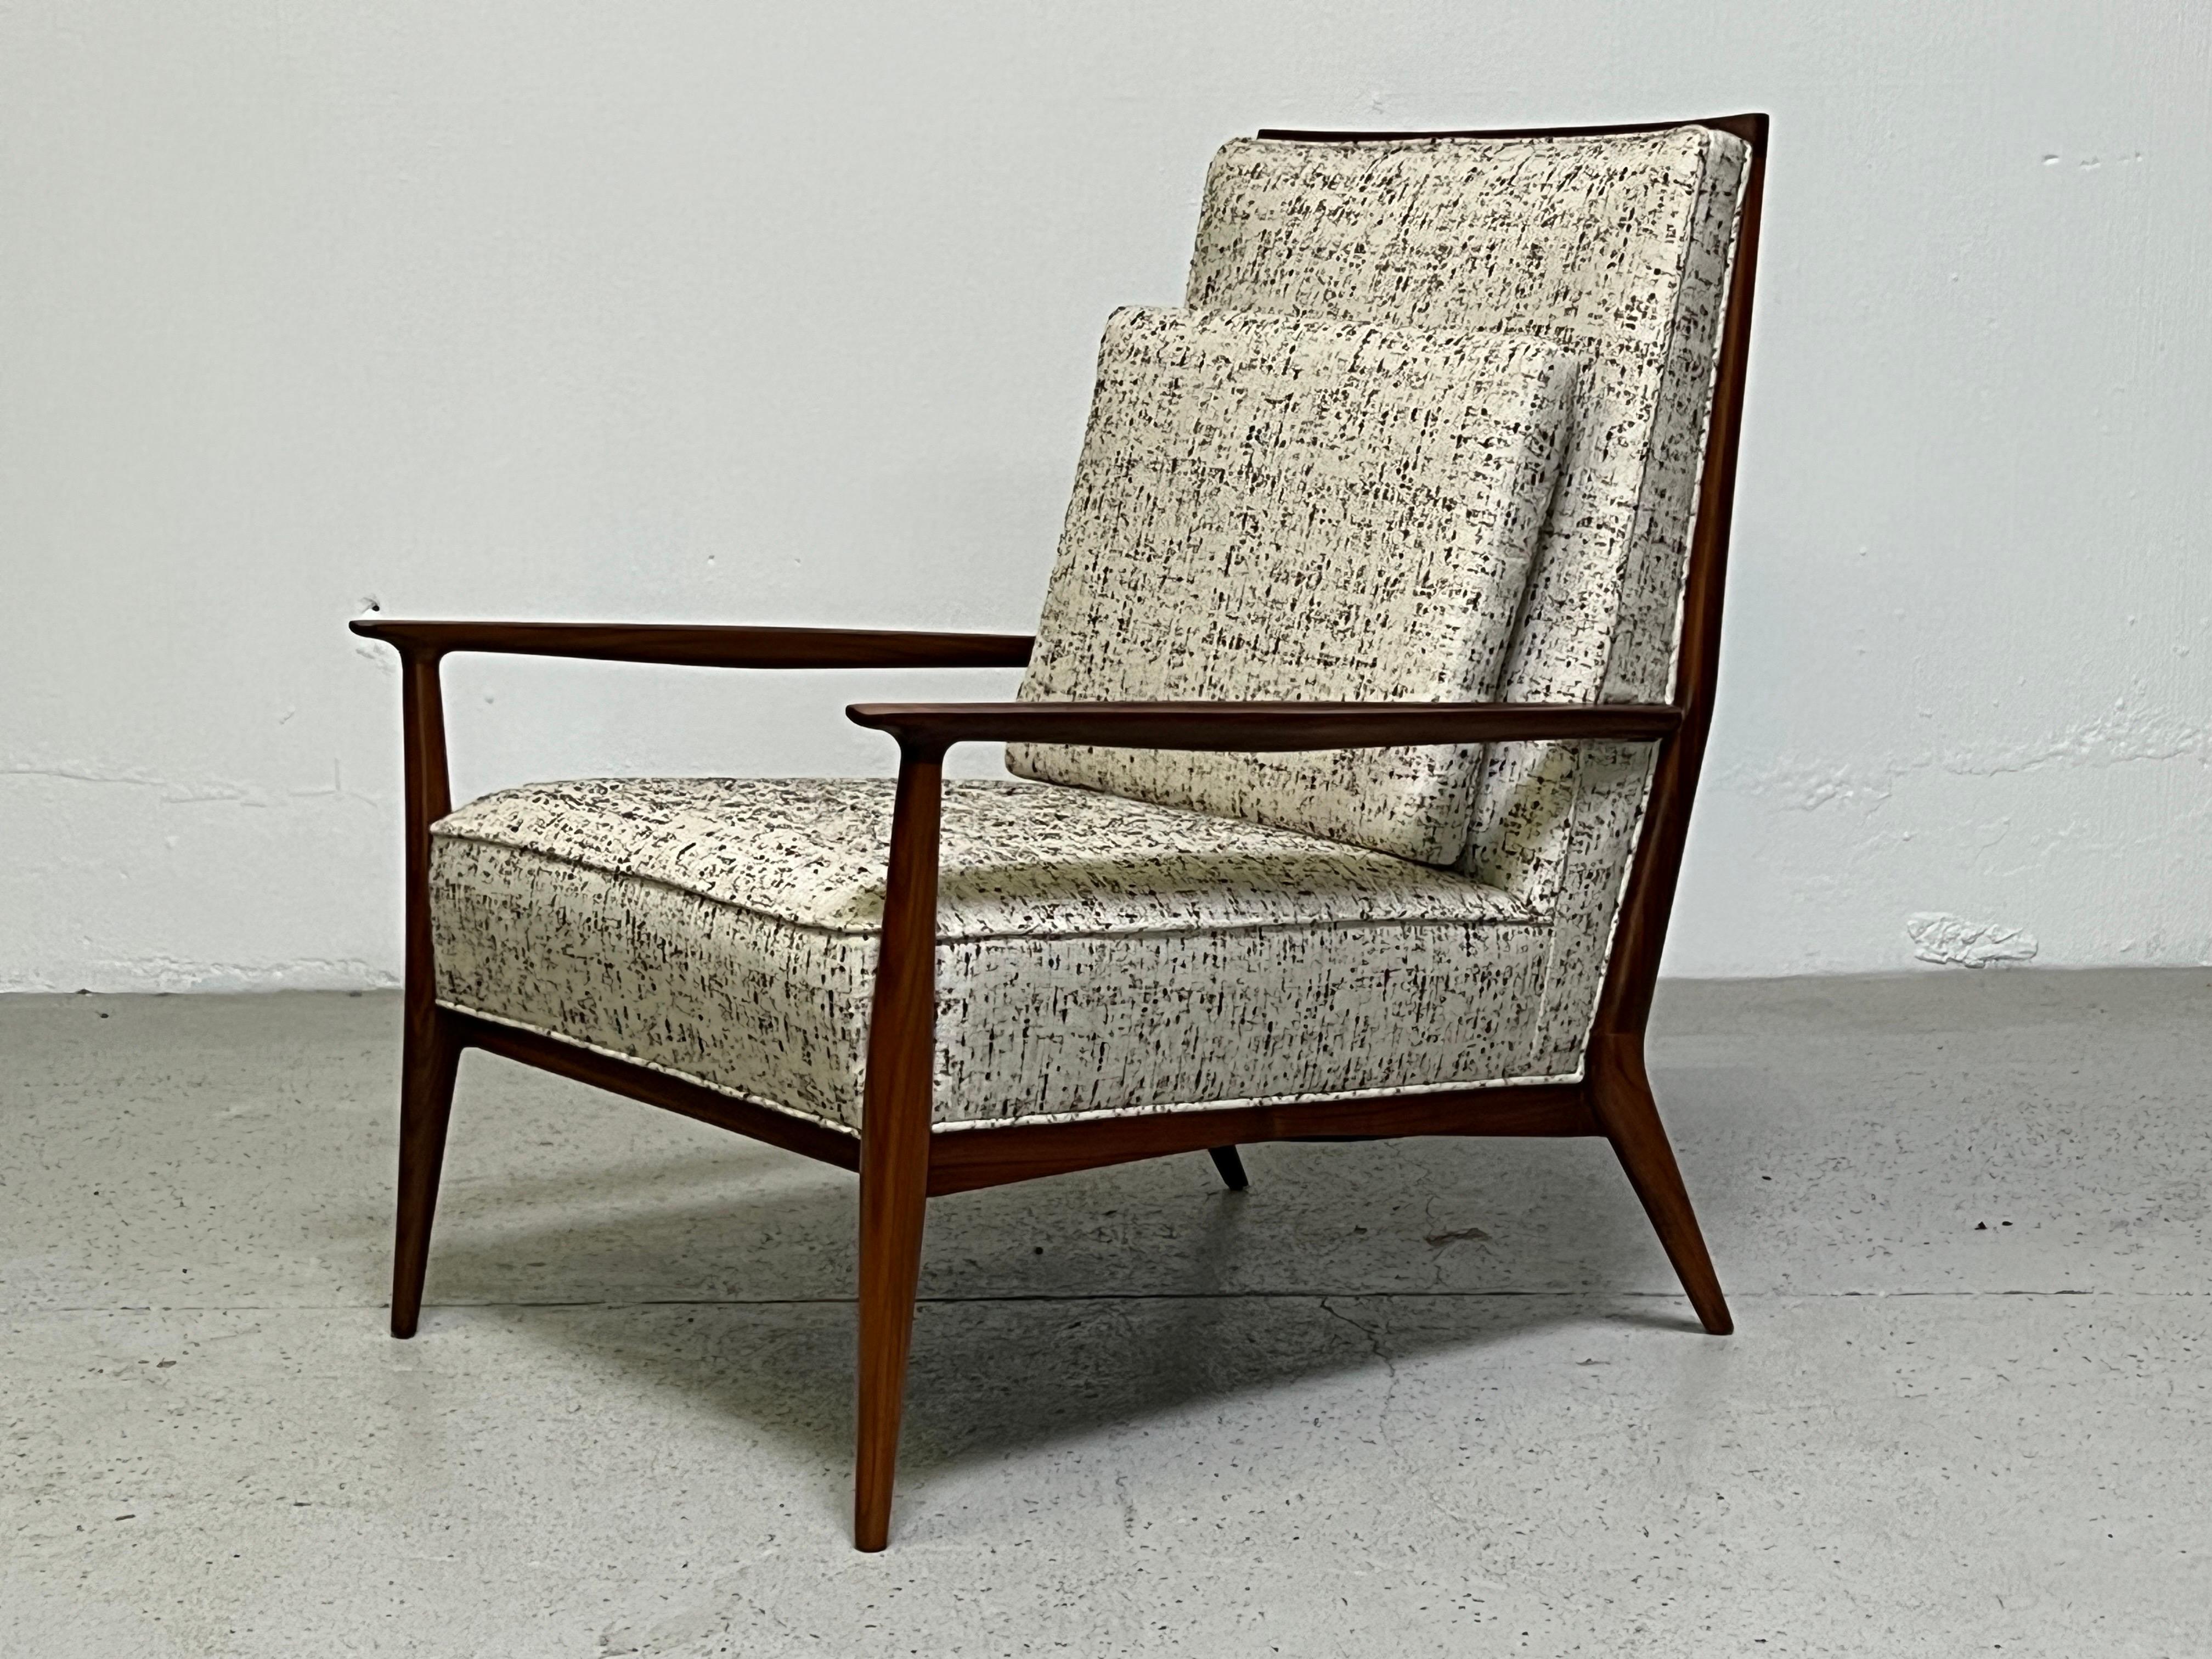 A sculptural high-back lounge chair with walnut frame designed by Paul McCobb. Refinished and reupholstered.